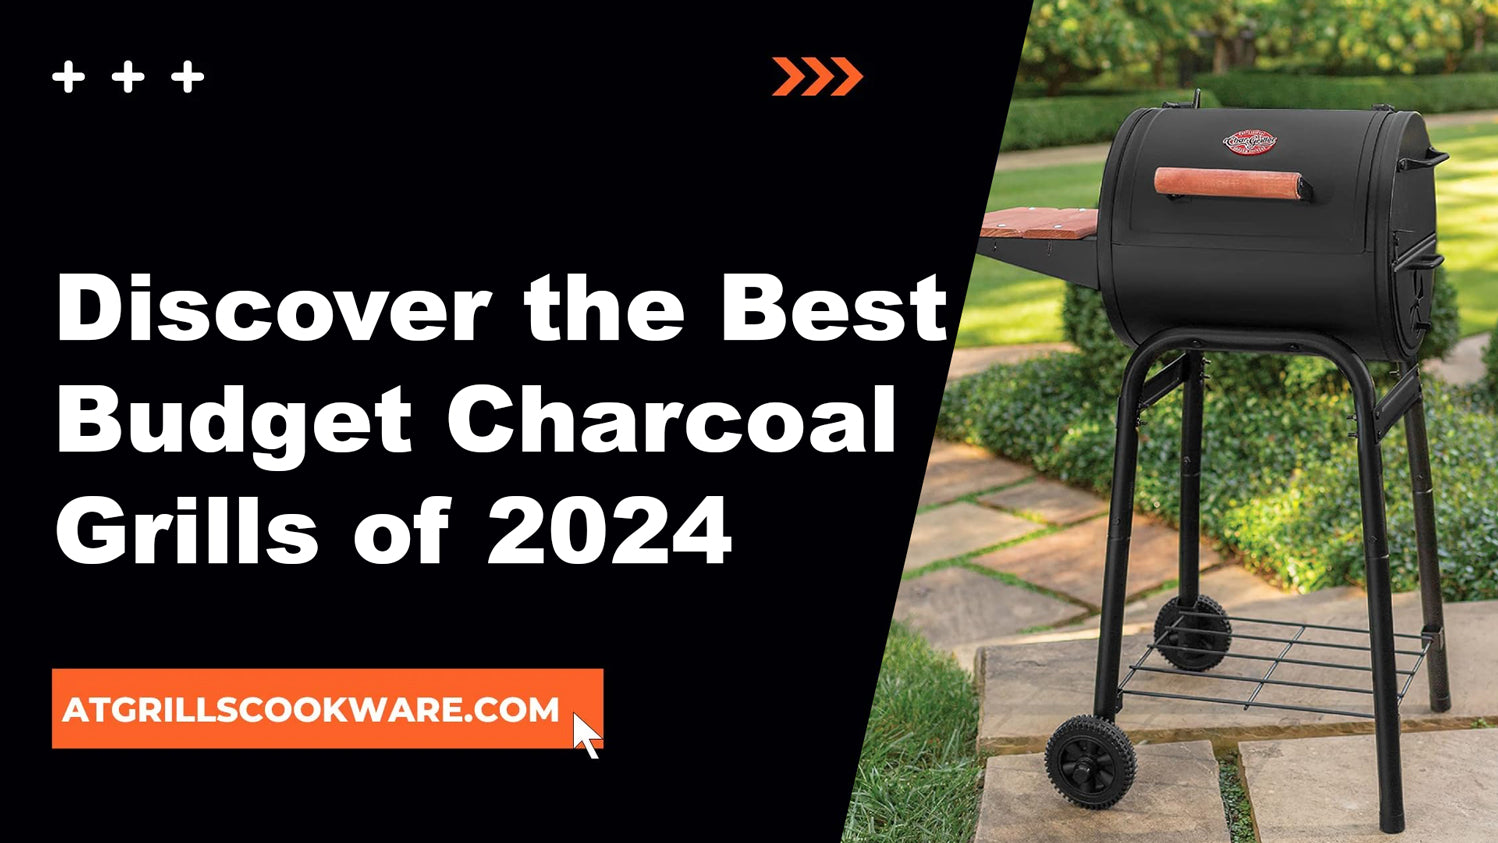 Discover the Best Budget Charcoal Grills of 2024